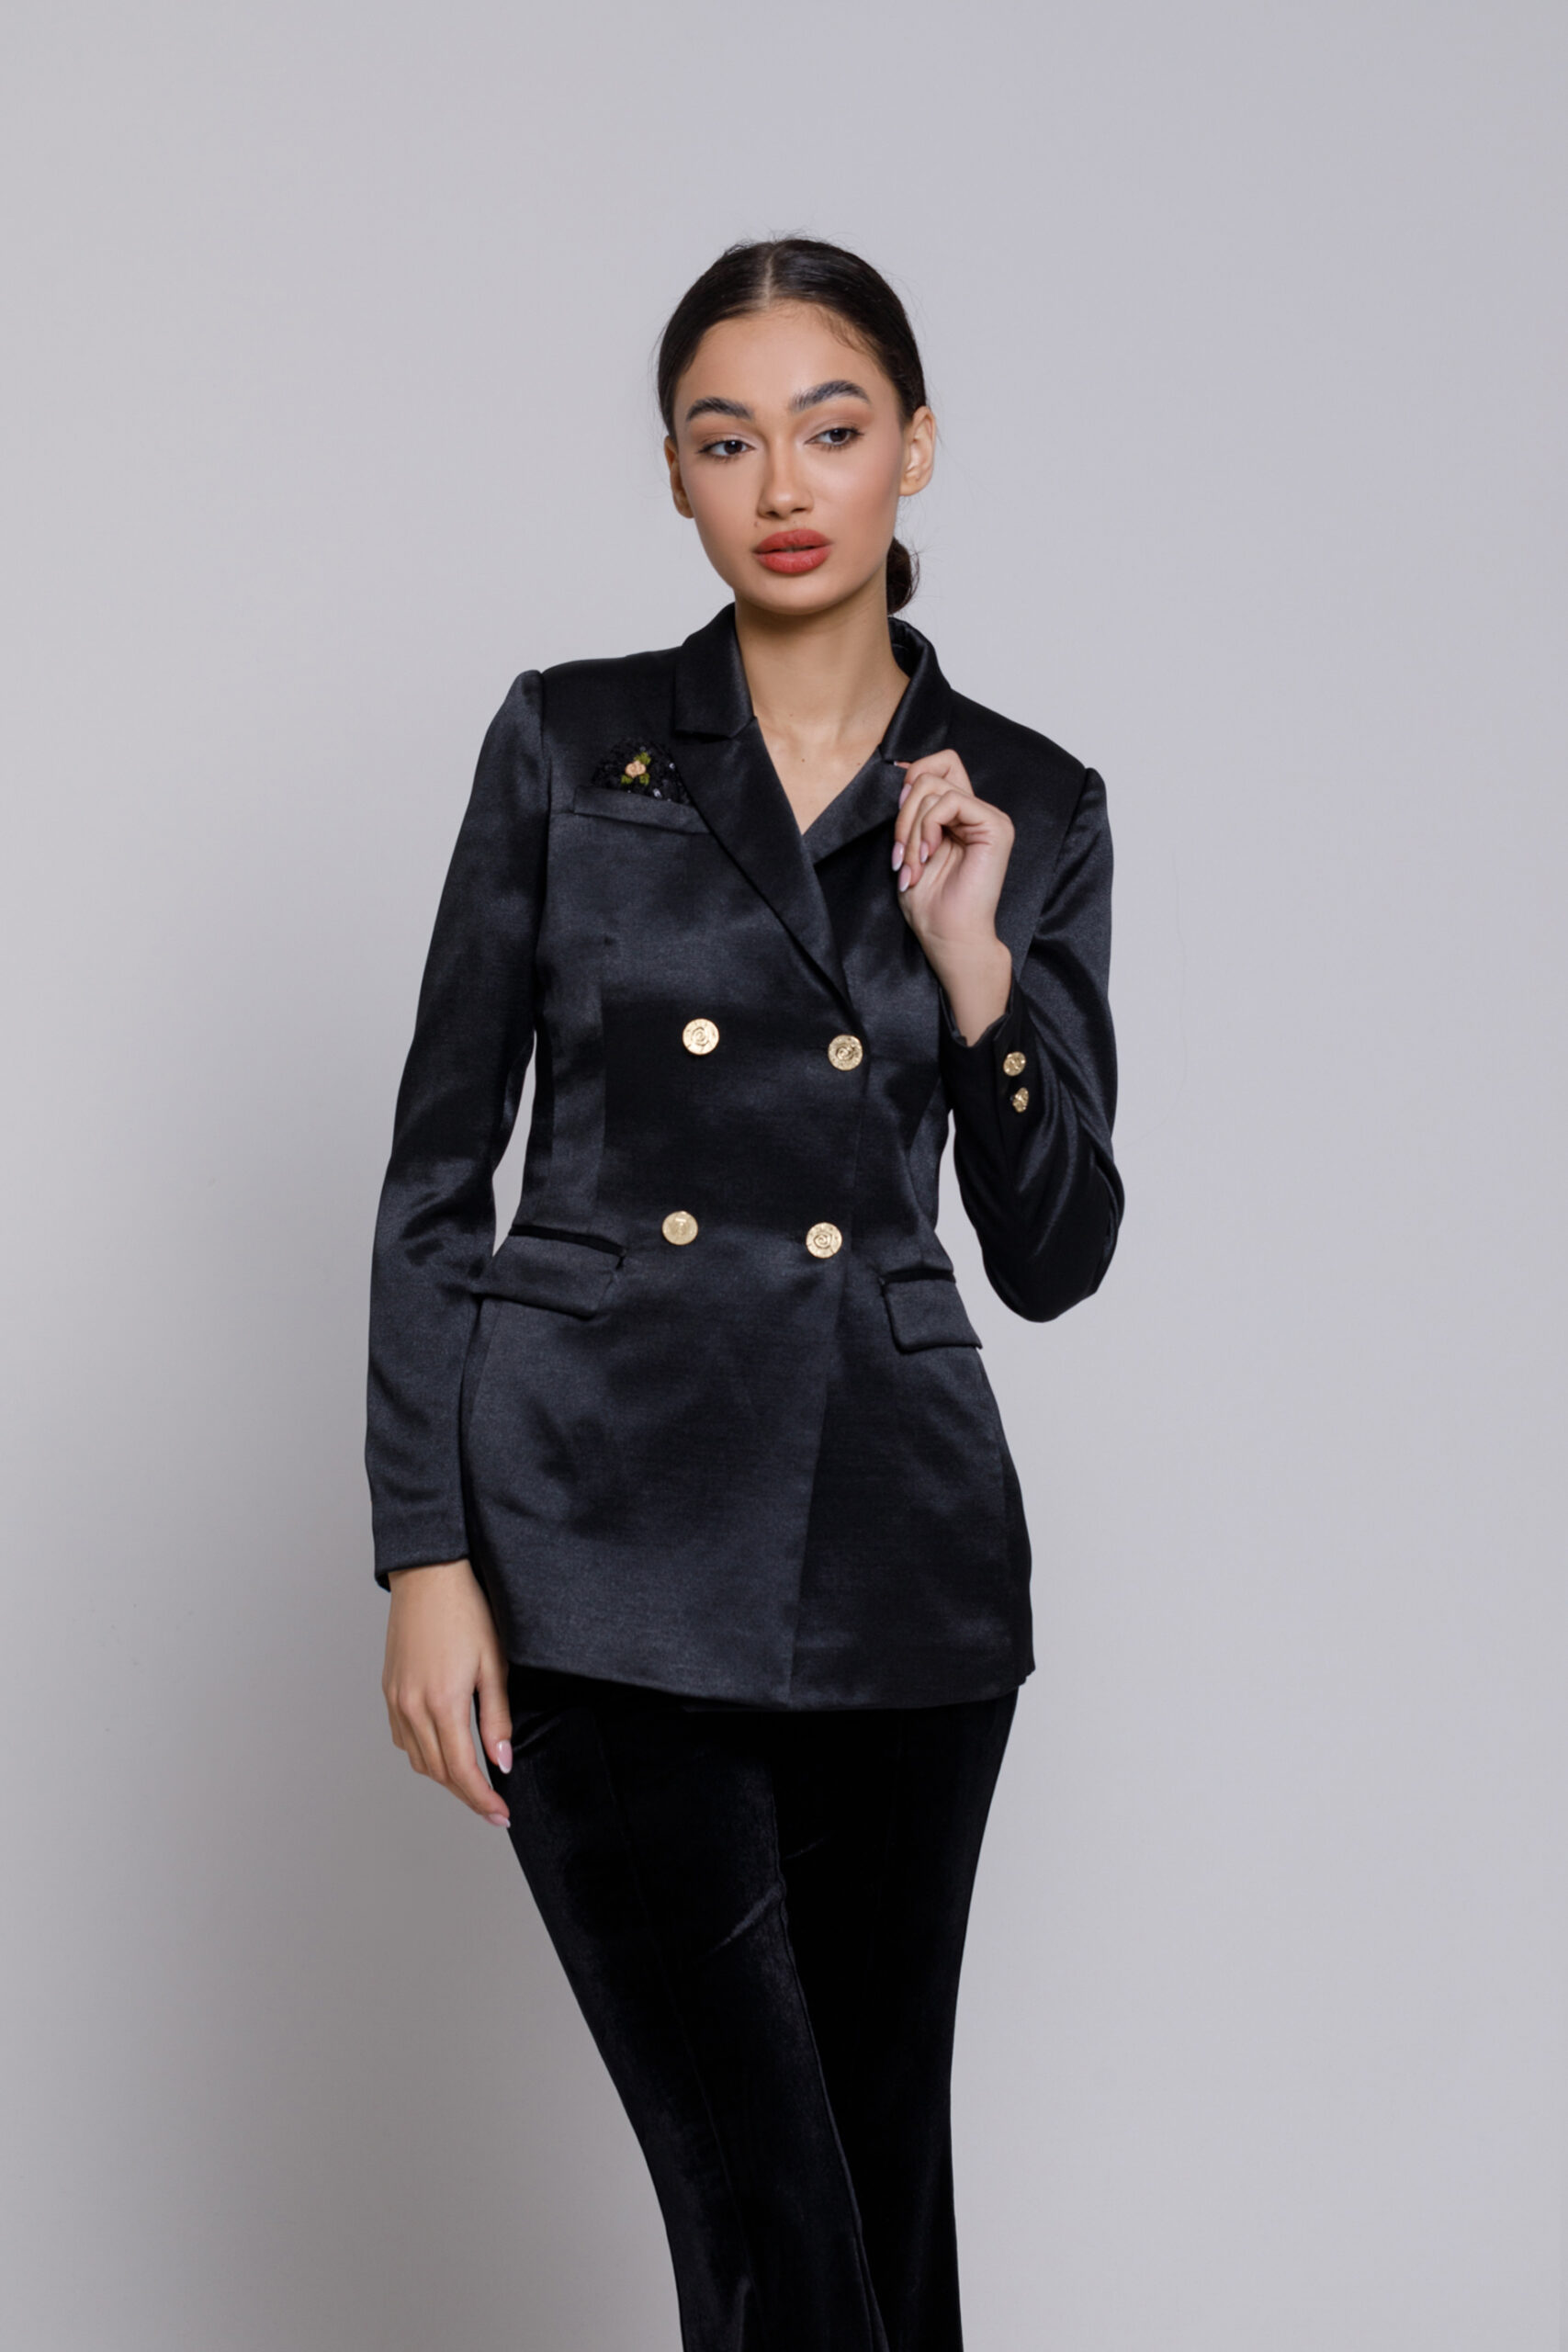 MARISOL black jacket with two rows of buttons. Natural fabrics, original design, handmade embroidery